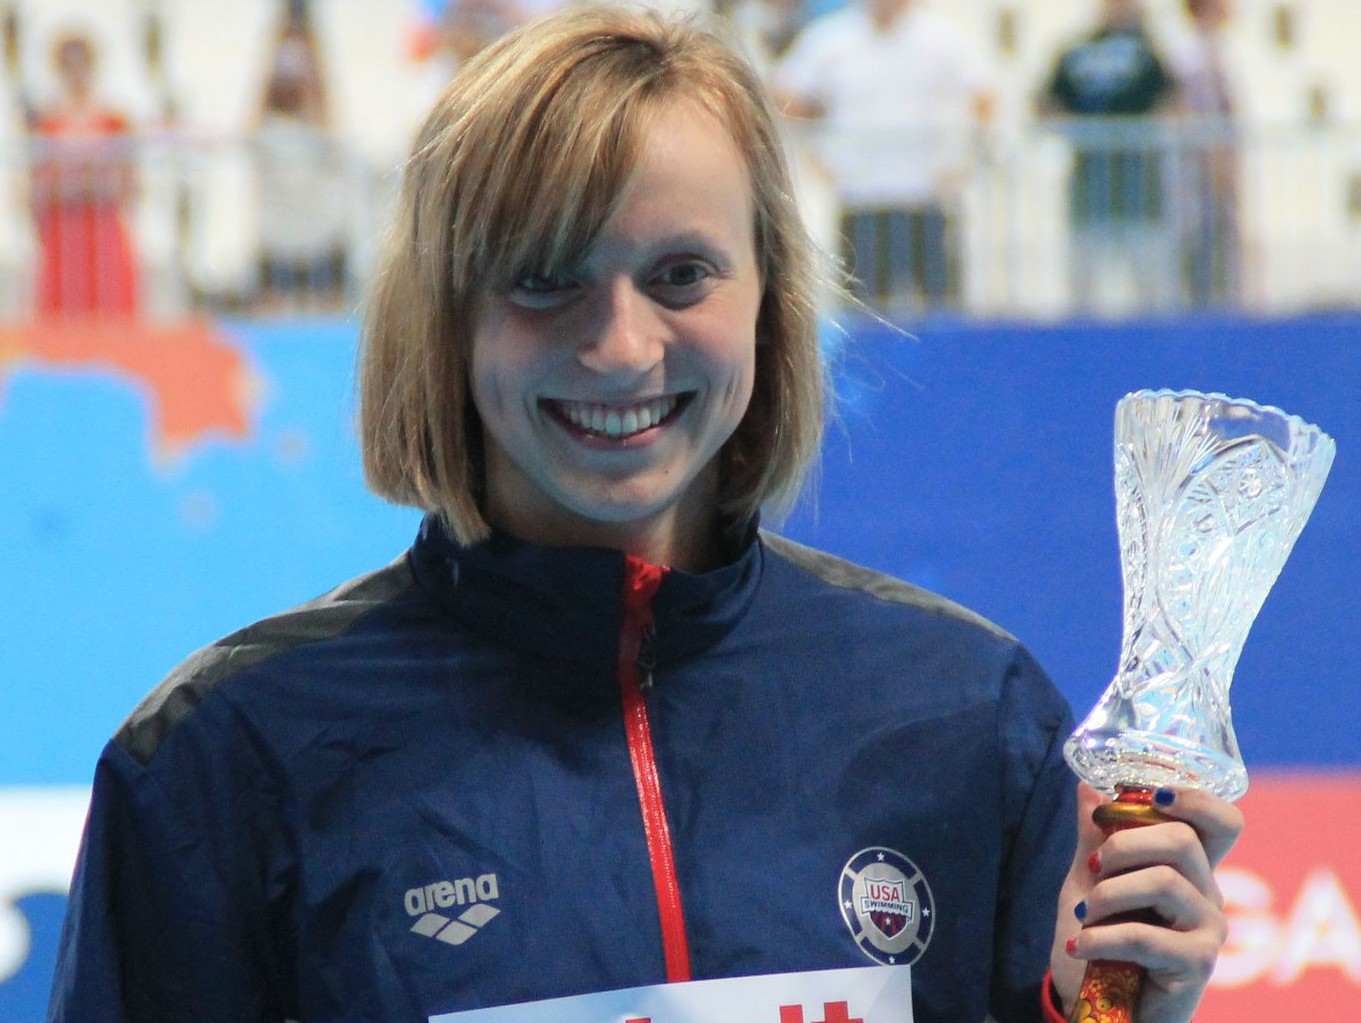 Katie Ledecky’s Feats At Worlds Highlighted On “CBS This Morning”